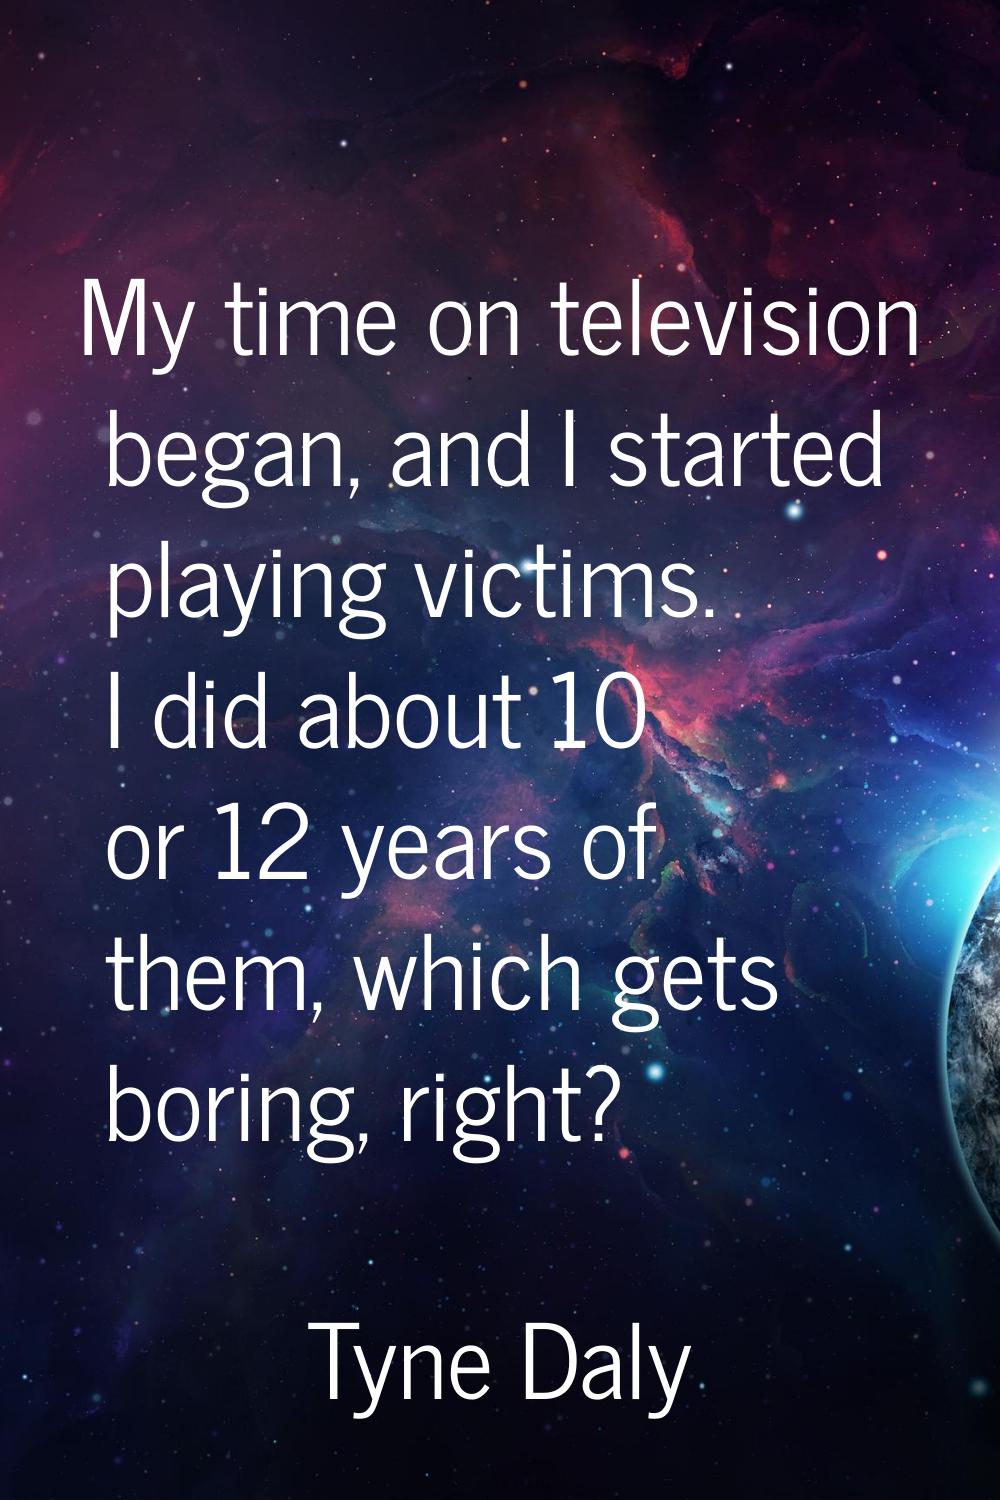 My time on television began, and I started playing victims. I did about 10 or 12 years of them, whi